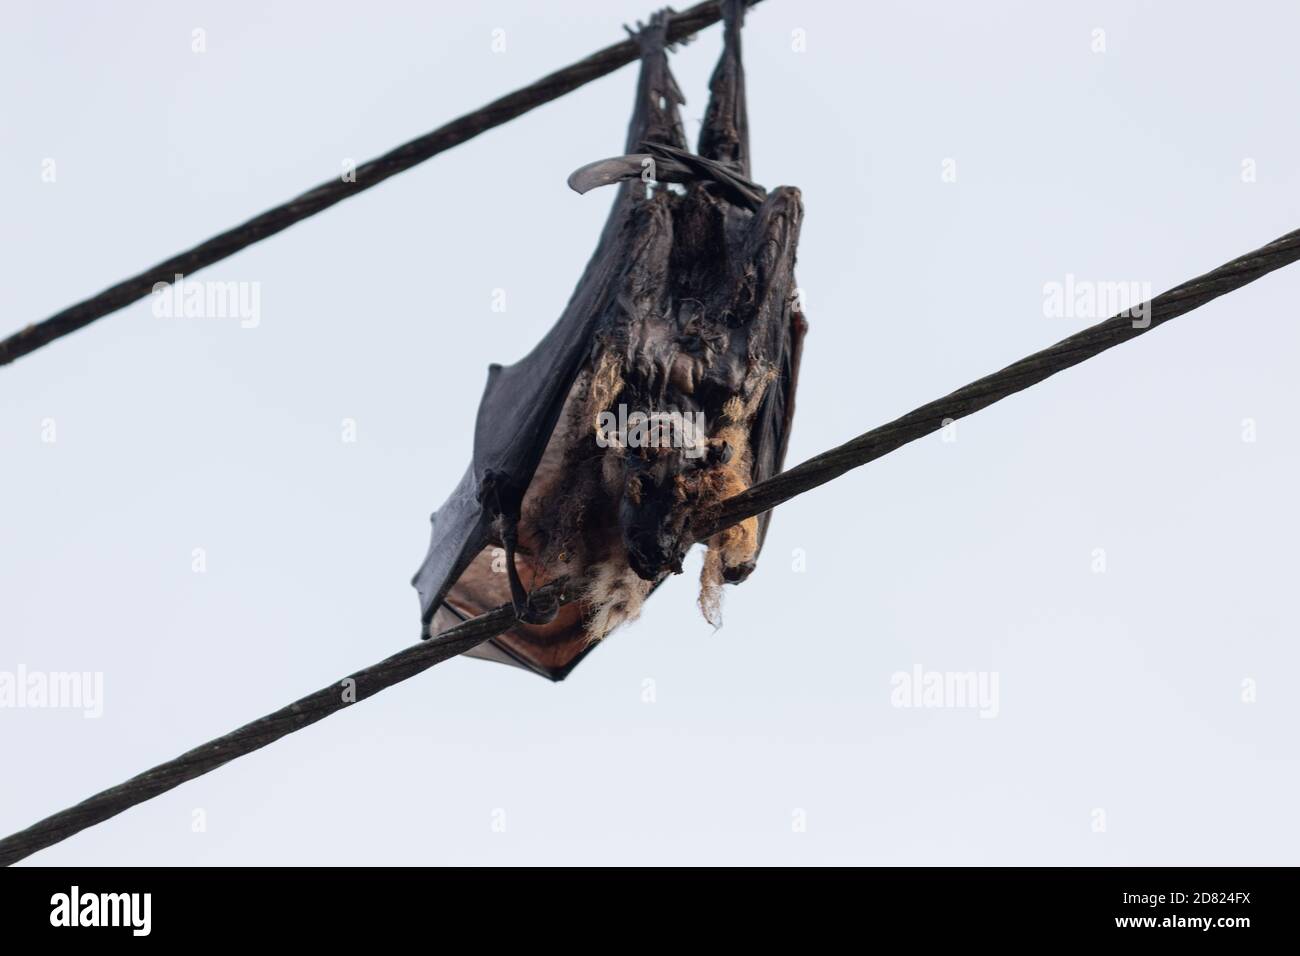 Bat electrocuted dead hanging in electric wires Stock Photo